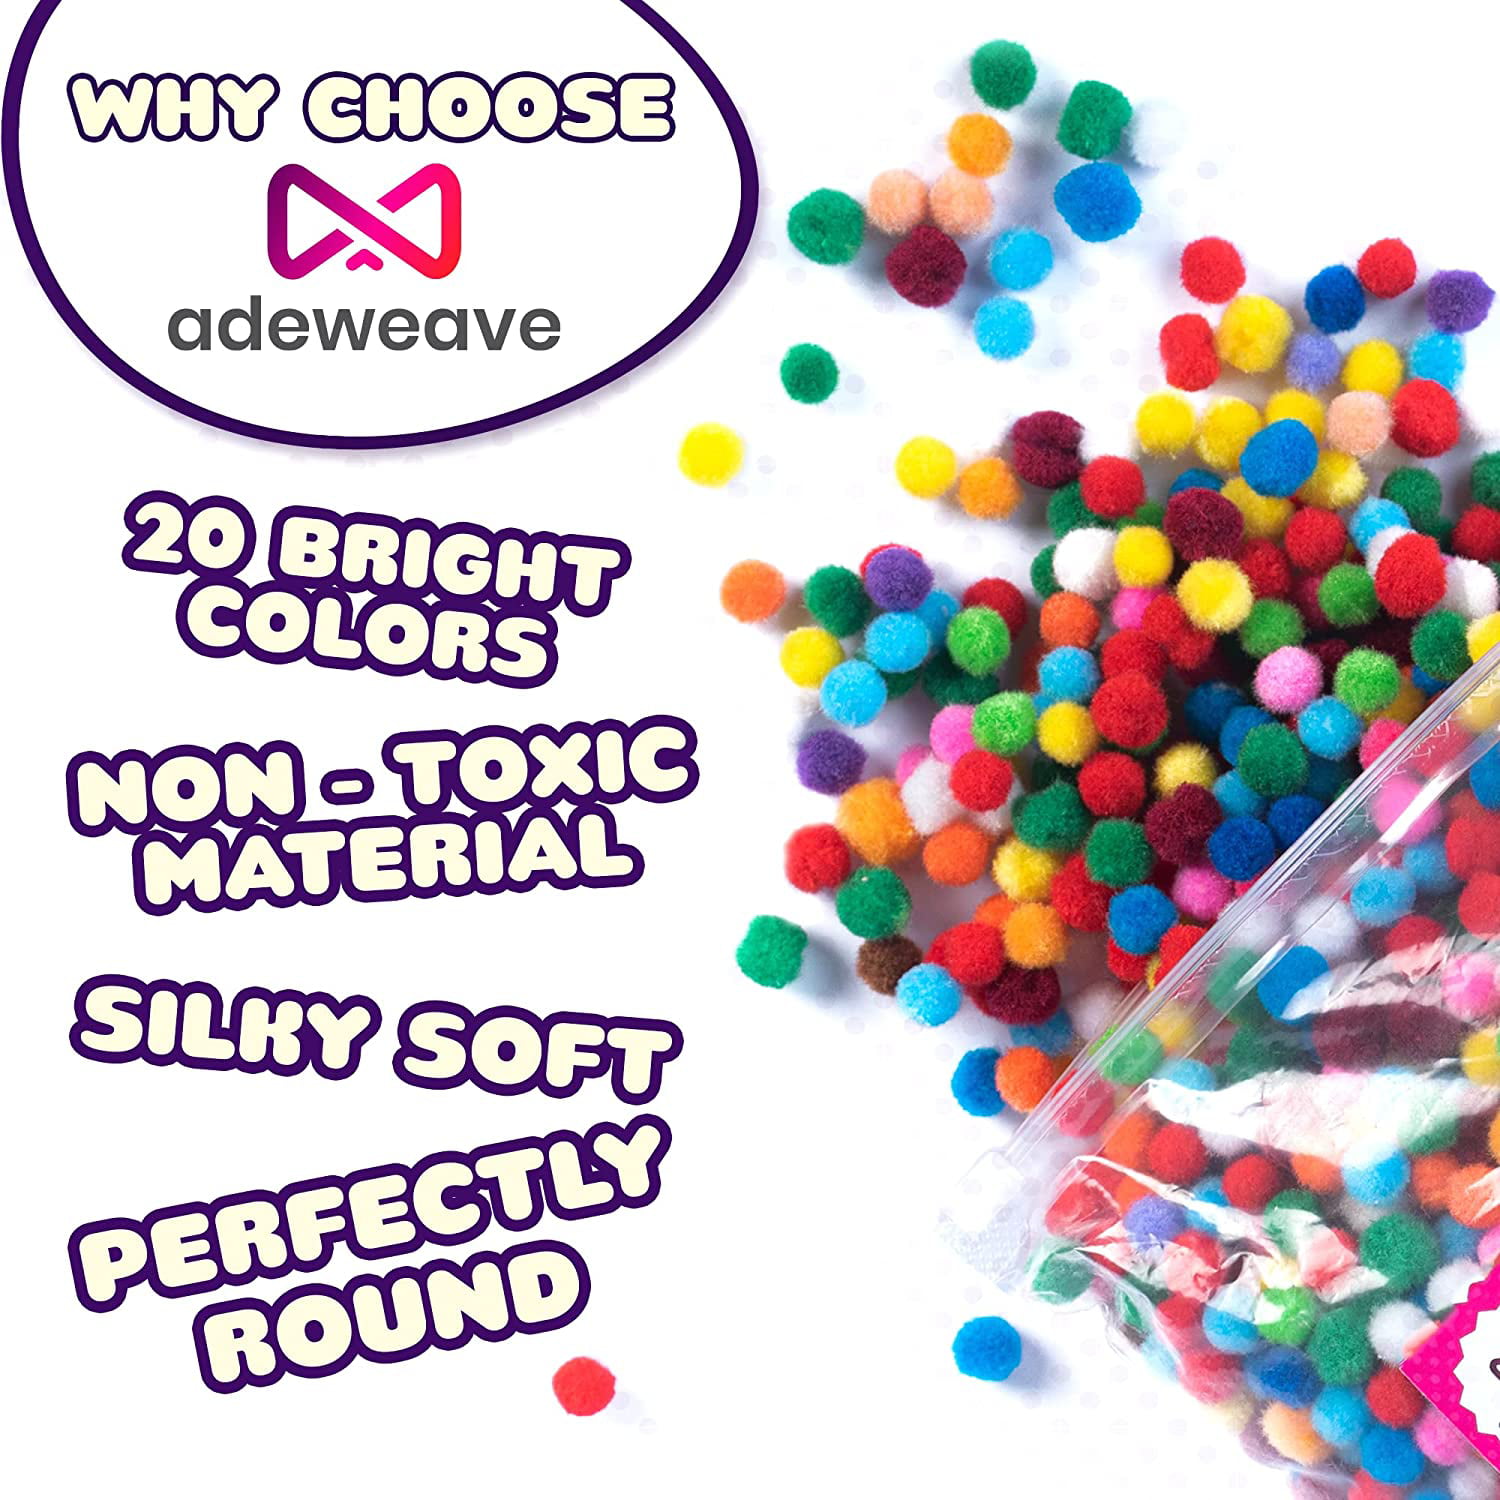 Adeweave 1.5 inch 100 Pom Poms - Multicolor Pompoms for Crafts in Assorted Colors Soft and Fluffy Large Pom Poms for Crafts in Reusable Zipper Bag